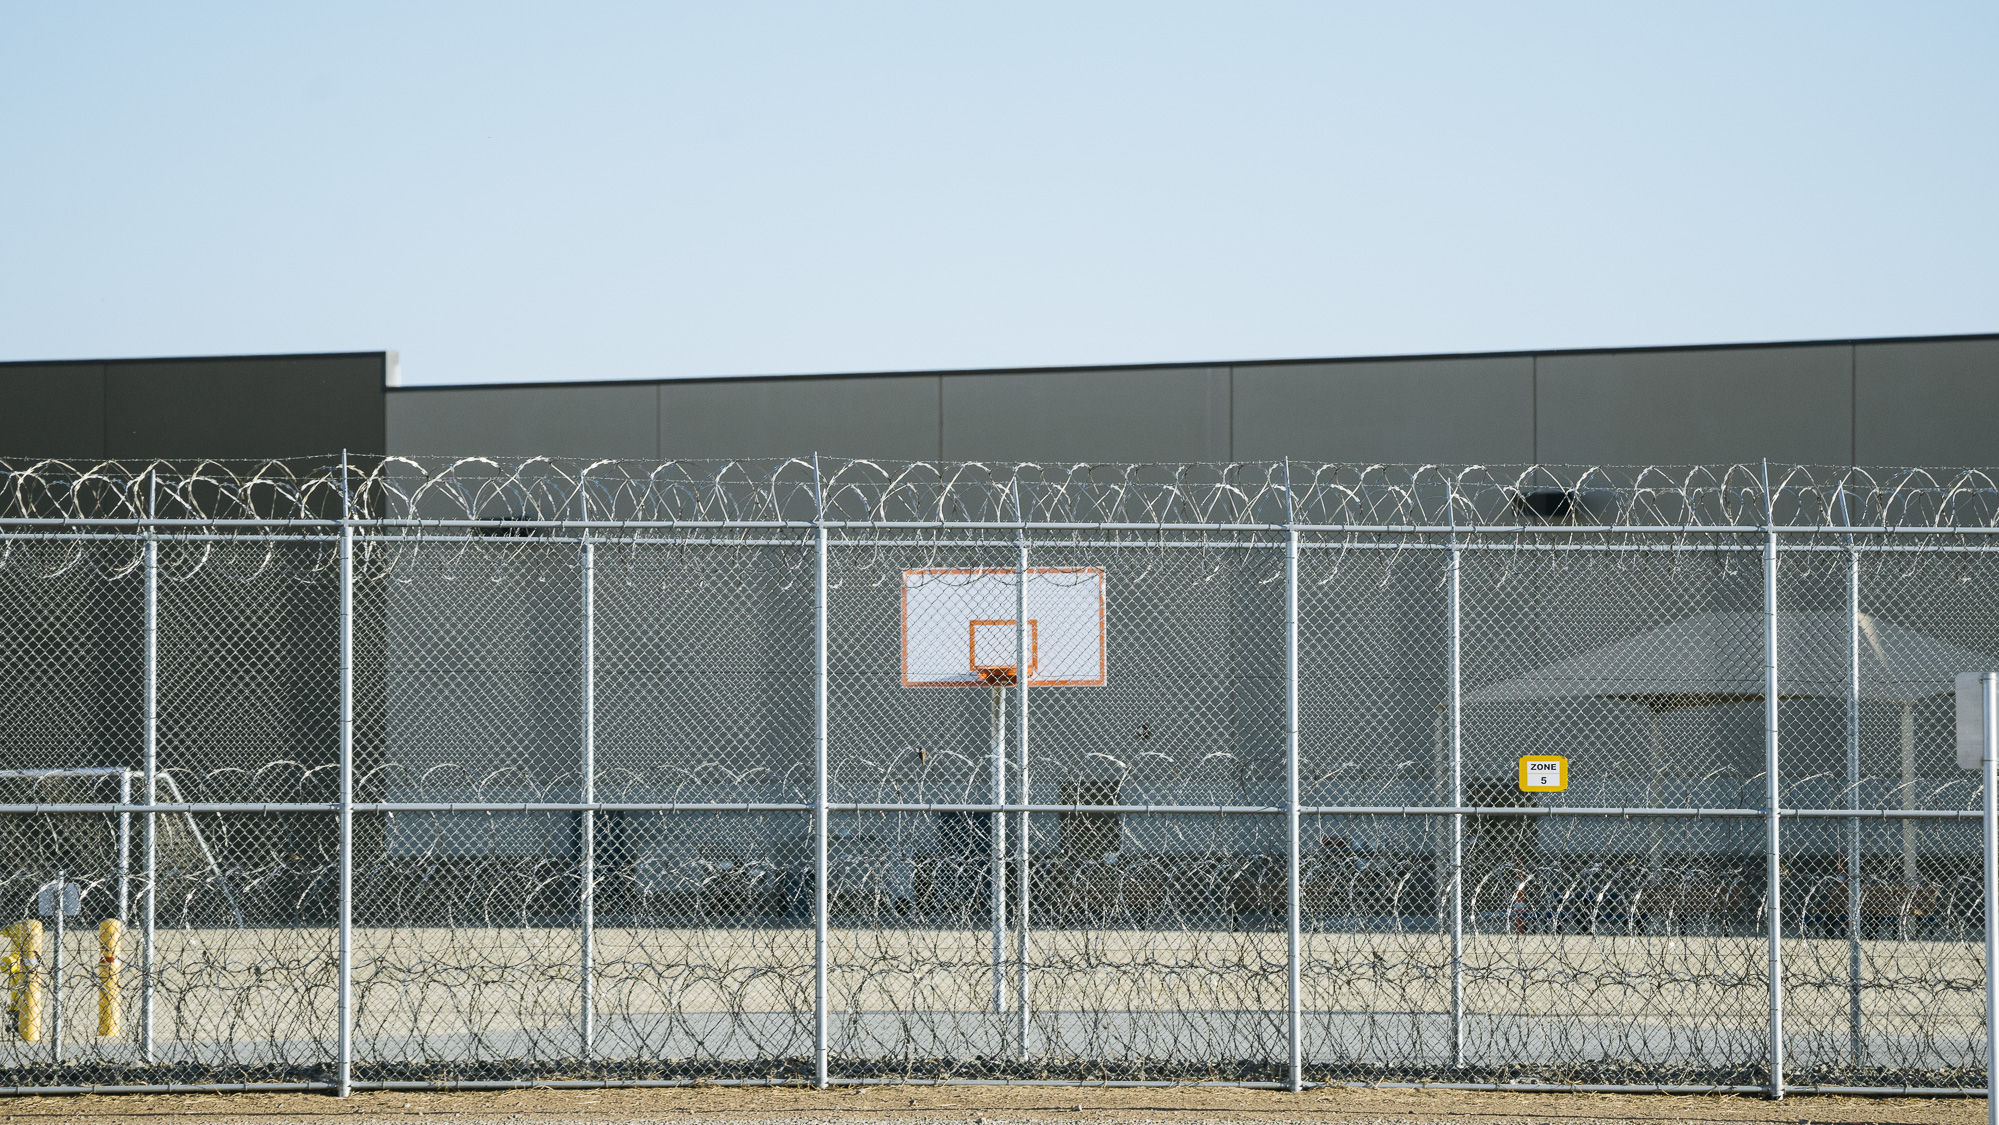  IMAGE CAPTION:  Imperial Regional Detention Facility in Calexico, California, is an ICE facility operated and owned by the private prison contractor CoreCivic (formerly Corrections Corporation of America).CCA's revenues in 2015 were $1.79bn.    